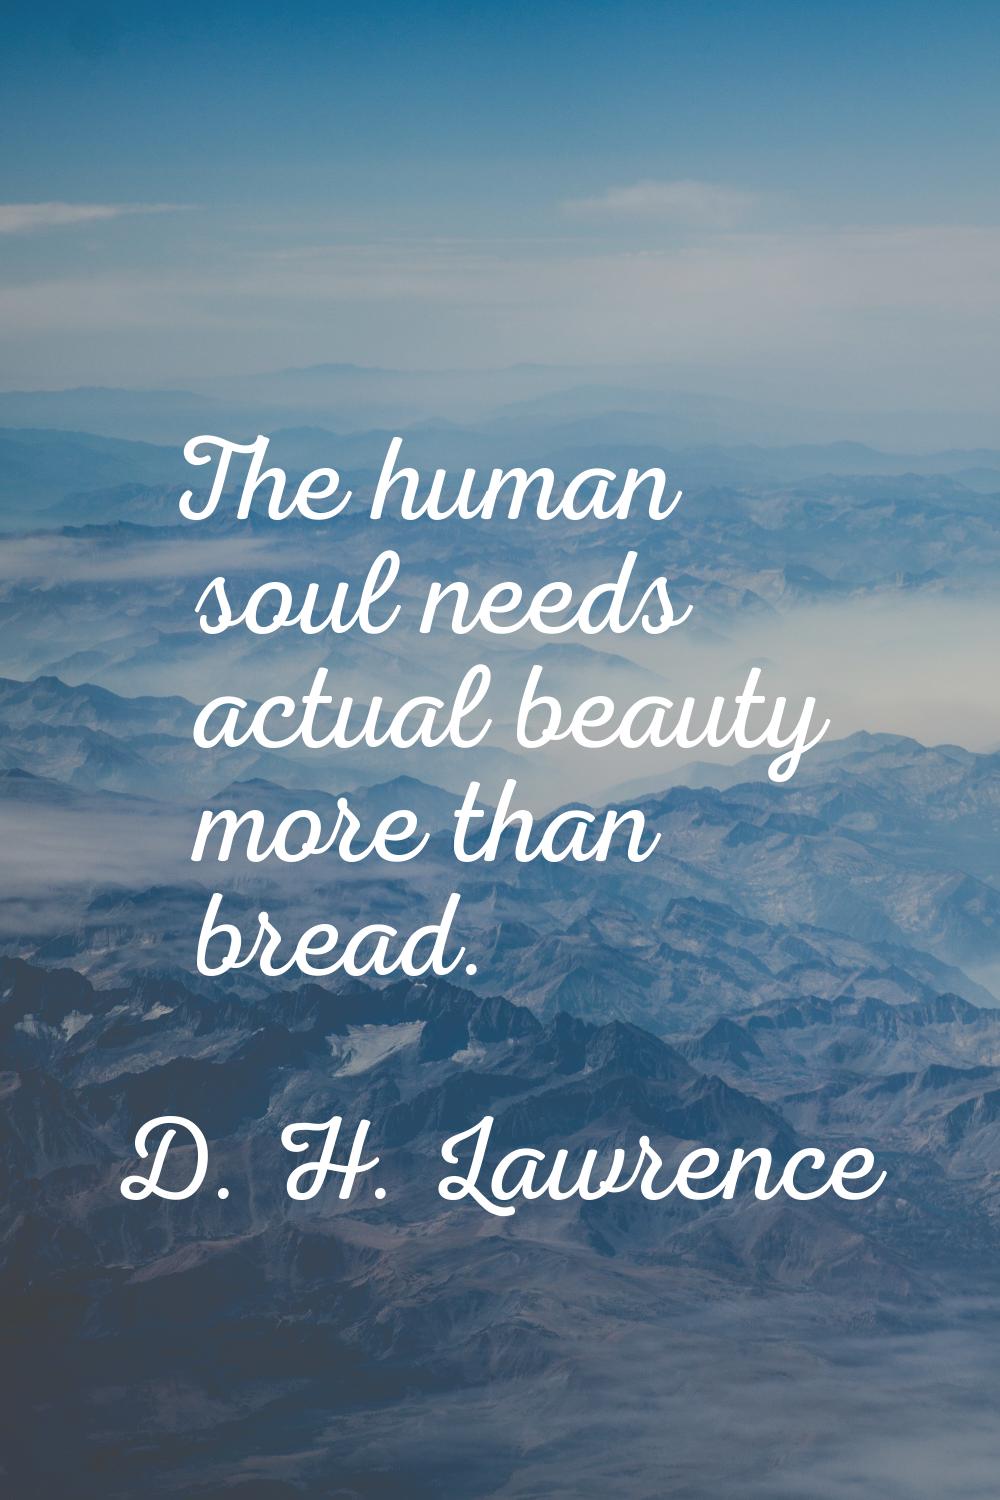 The human soul needs actual beauty more than bread.